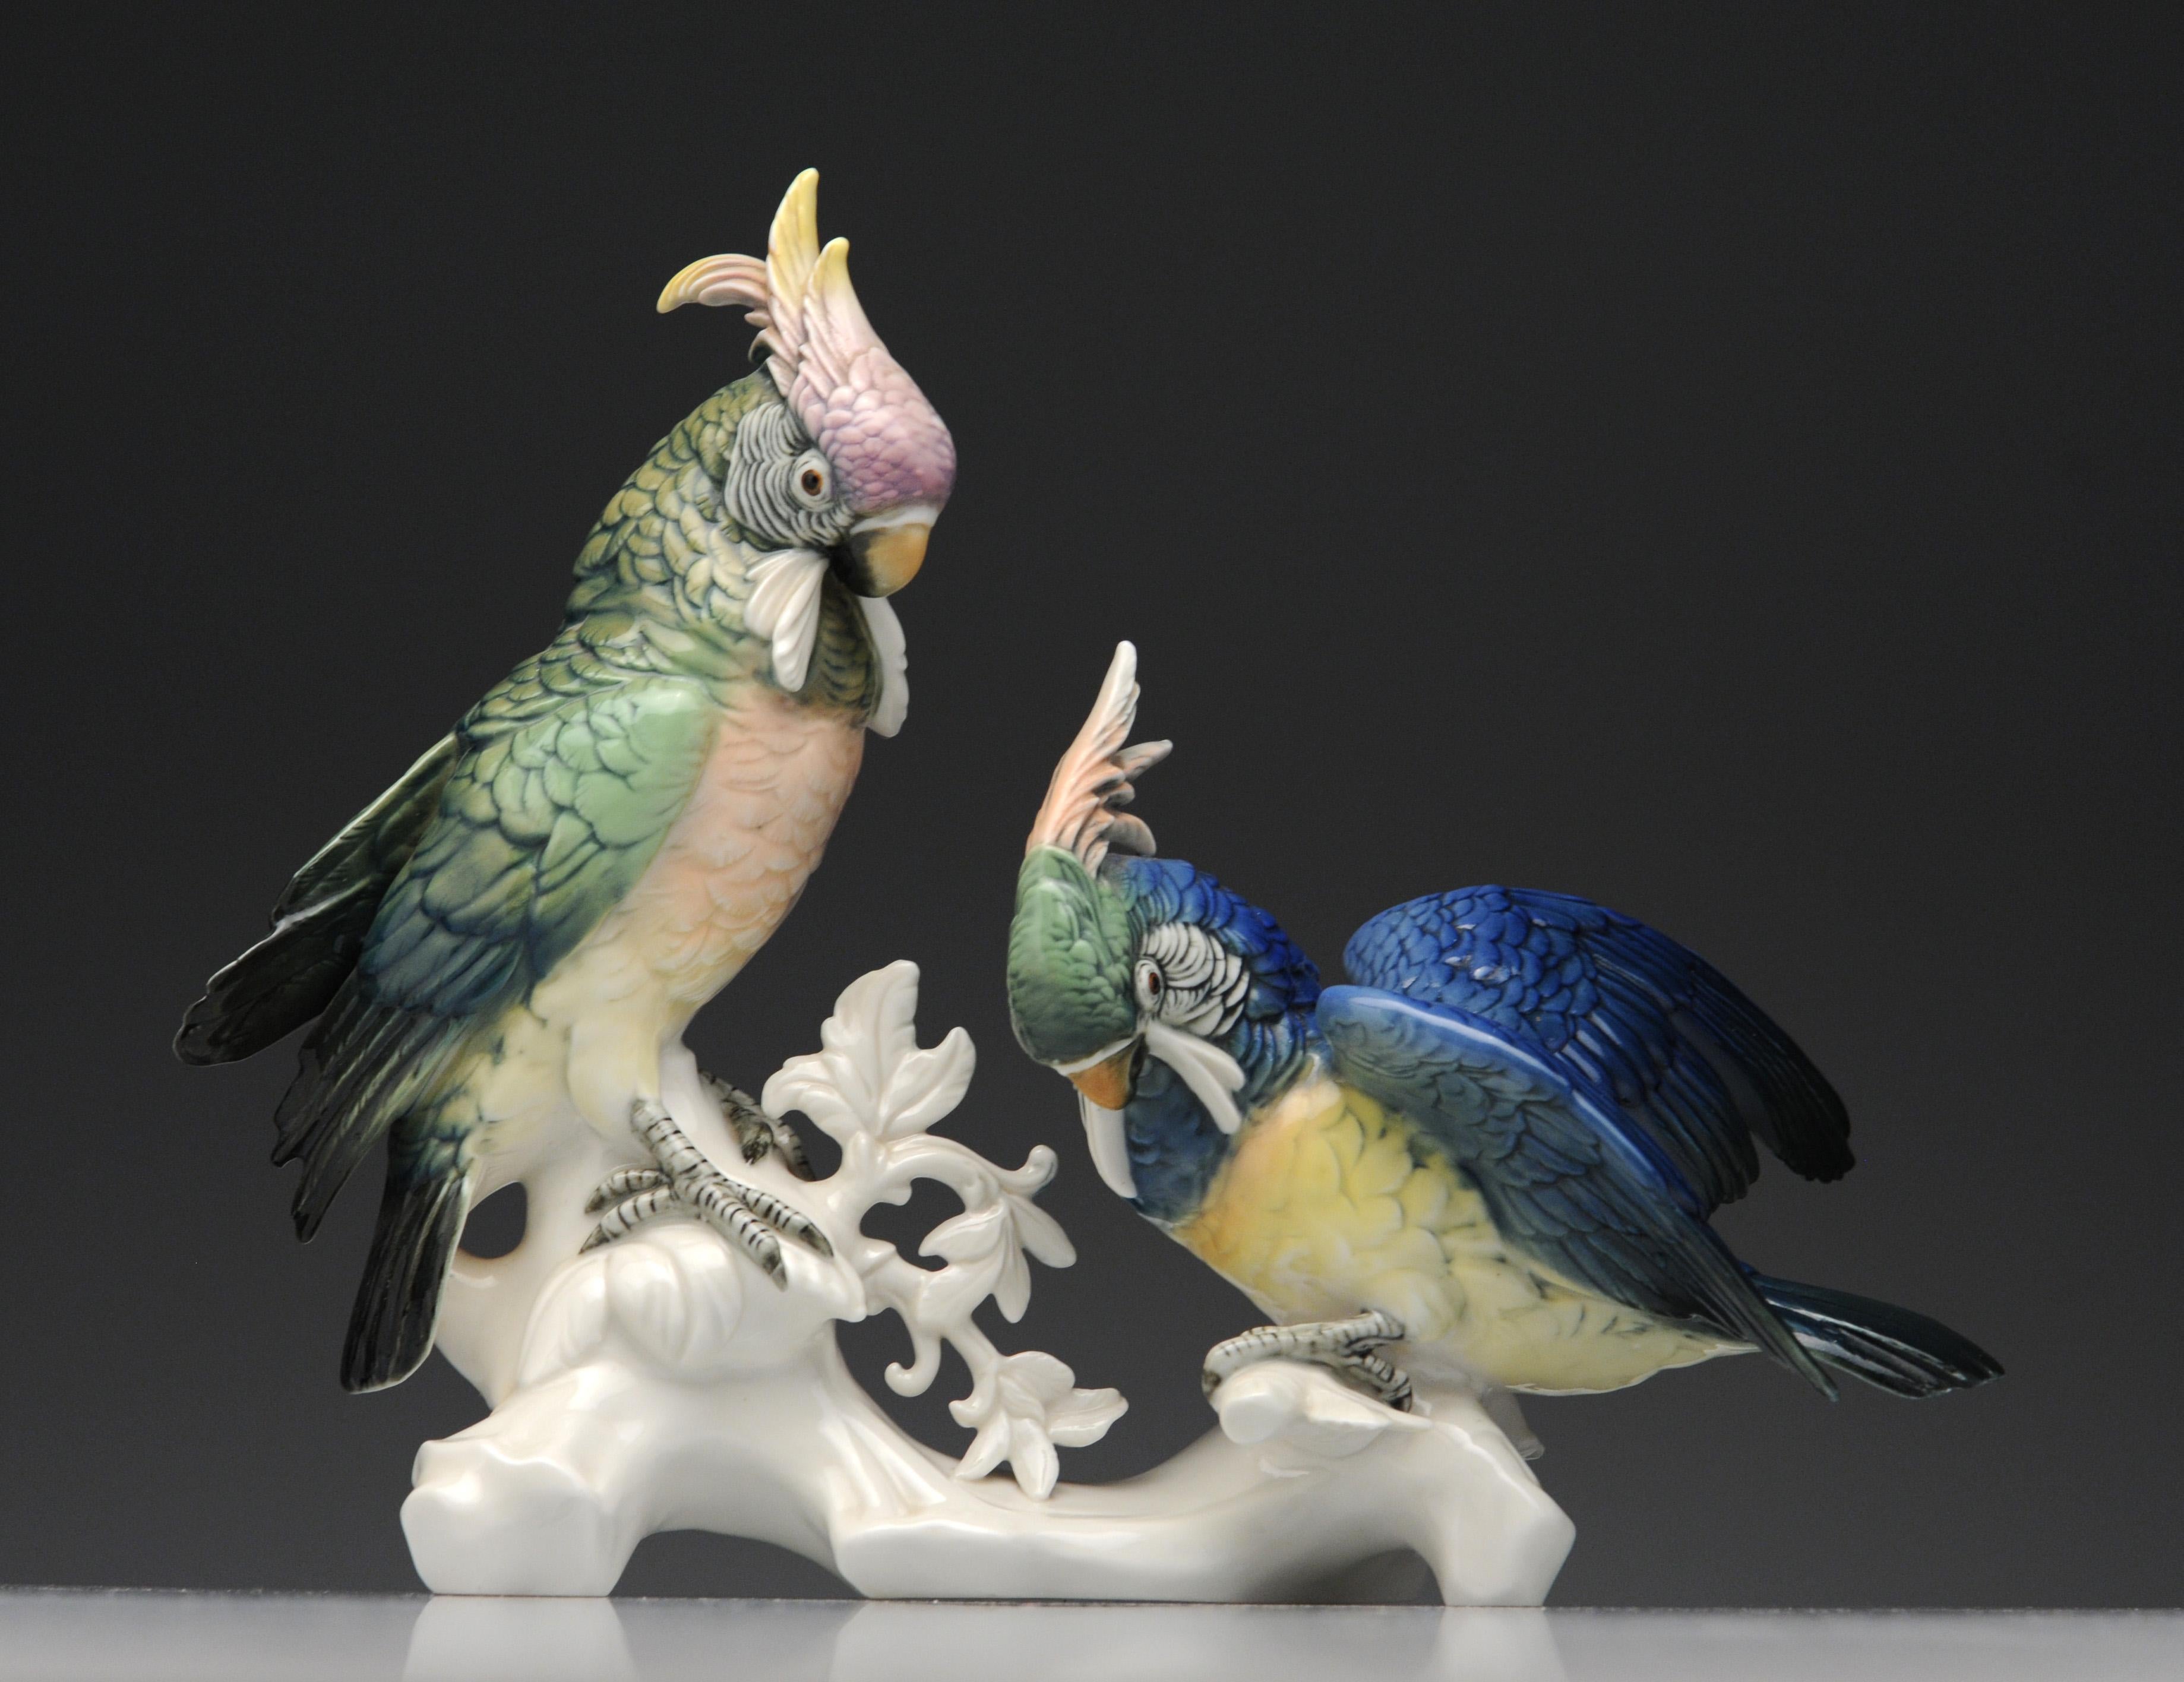 Excellent hand painted Karl Ens figurine with pair of cockatoo's. Figurine dates to the 1940s and is in excellent condition.